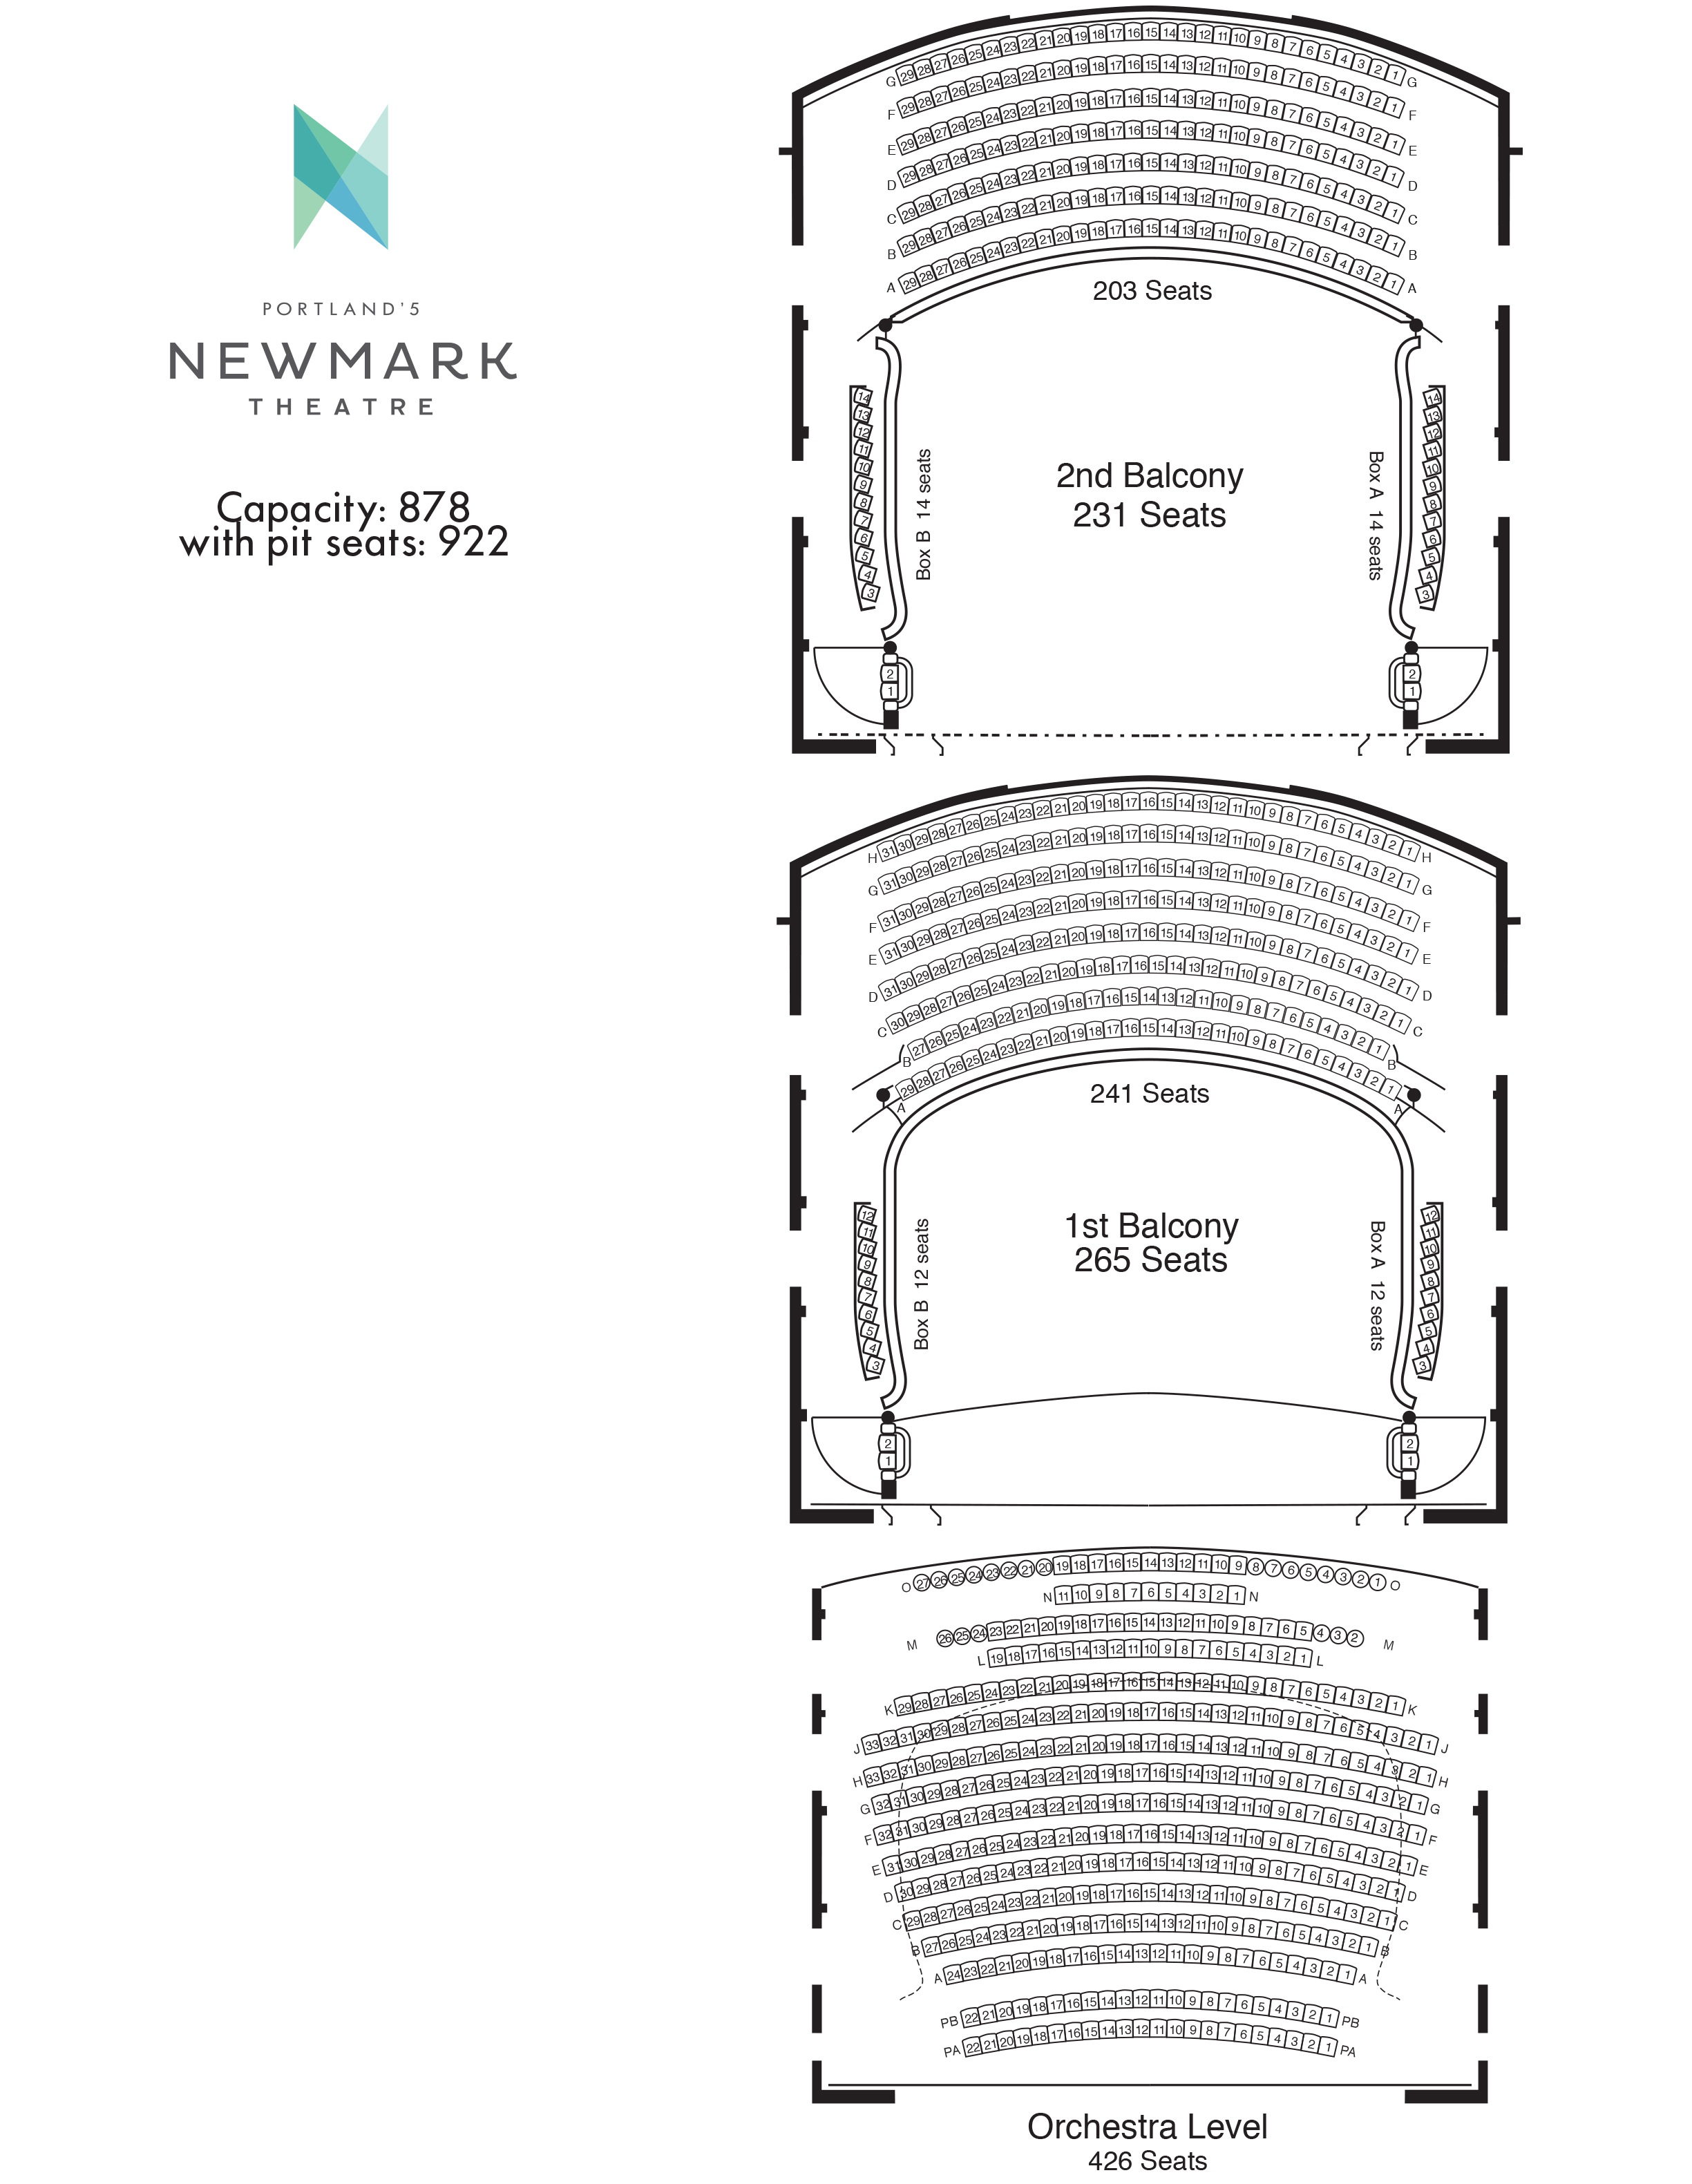 Newmark Theatre, Portland: Tickets, Schedule, Seating Charts 